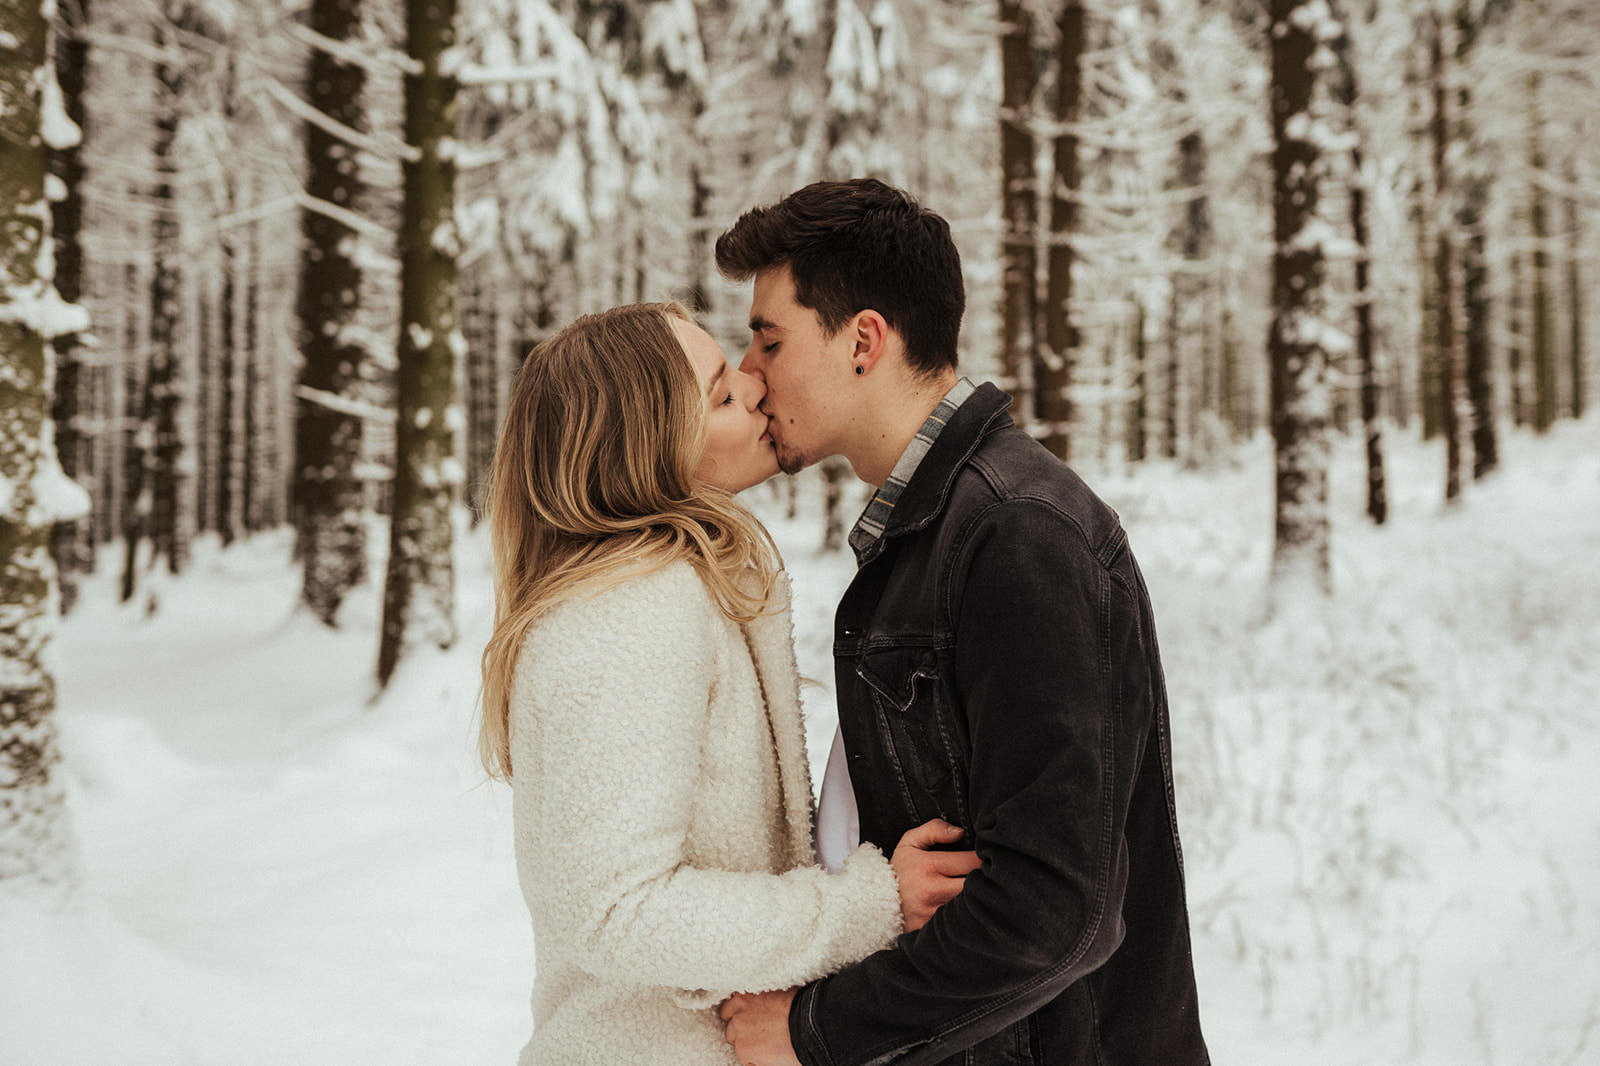 Another Snowy Love Story by Herzallerliebst